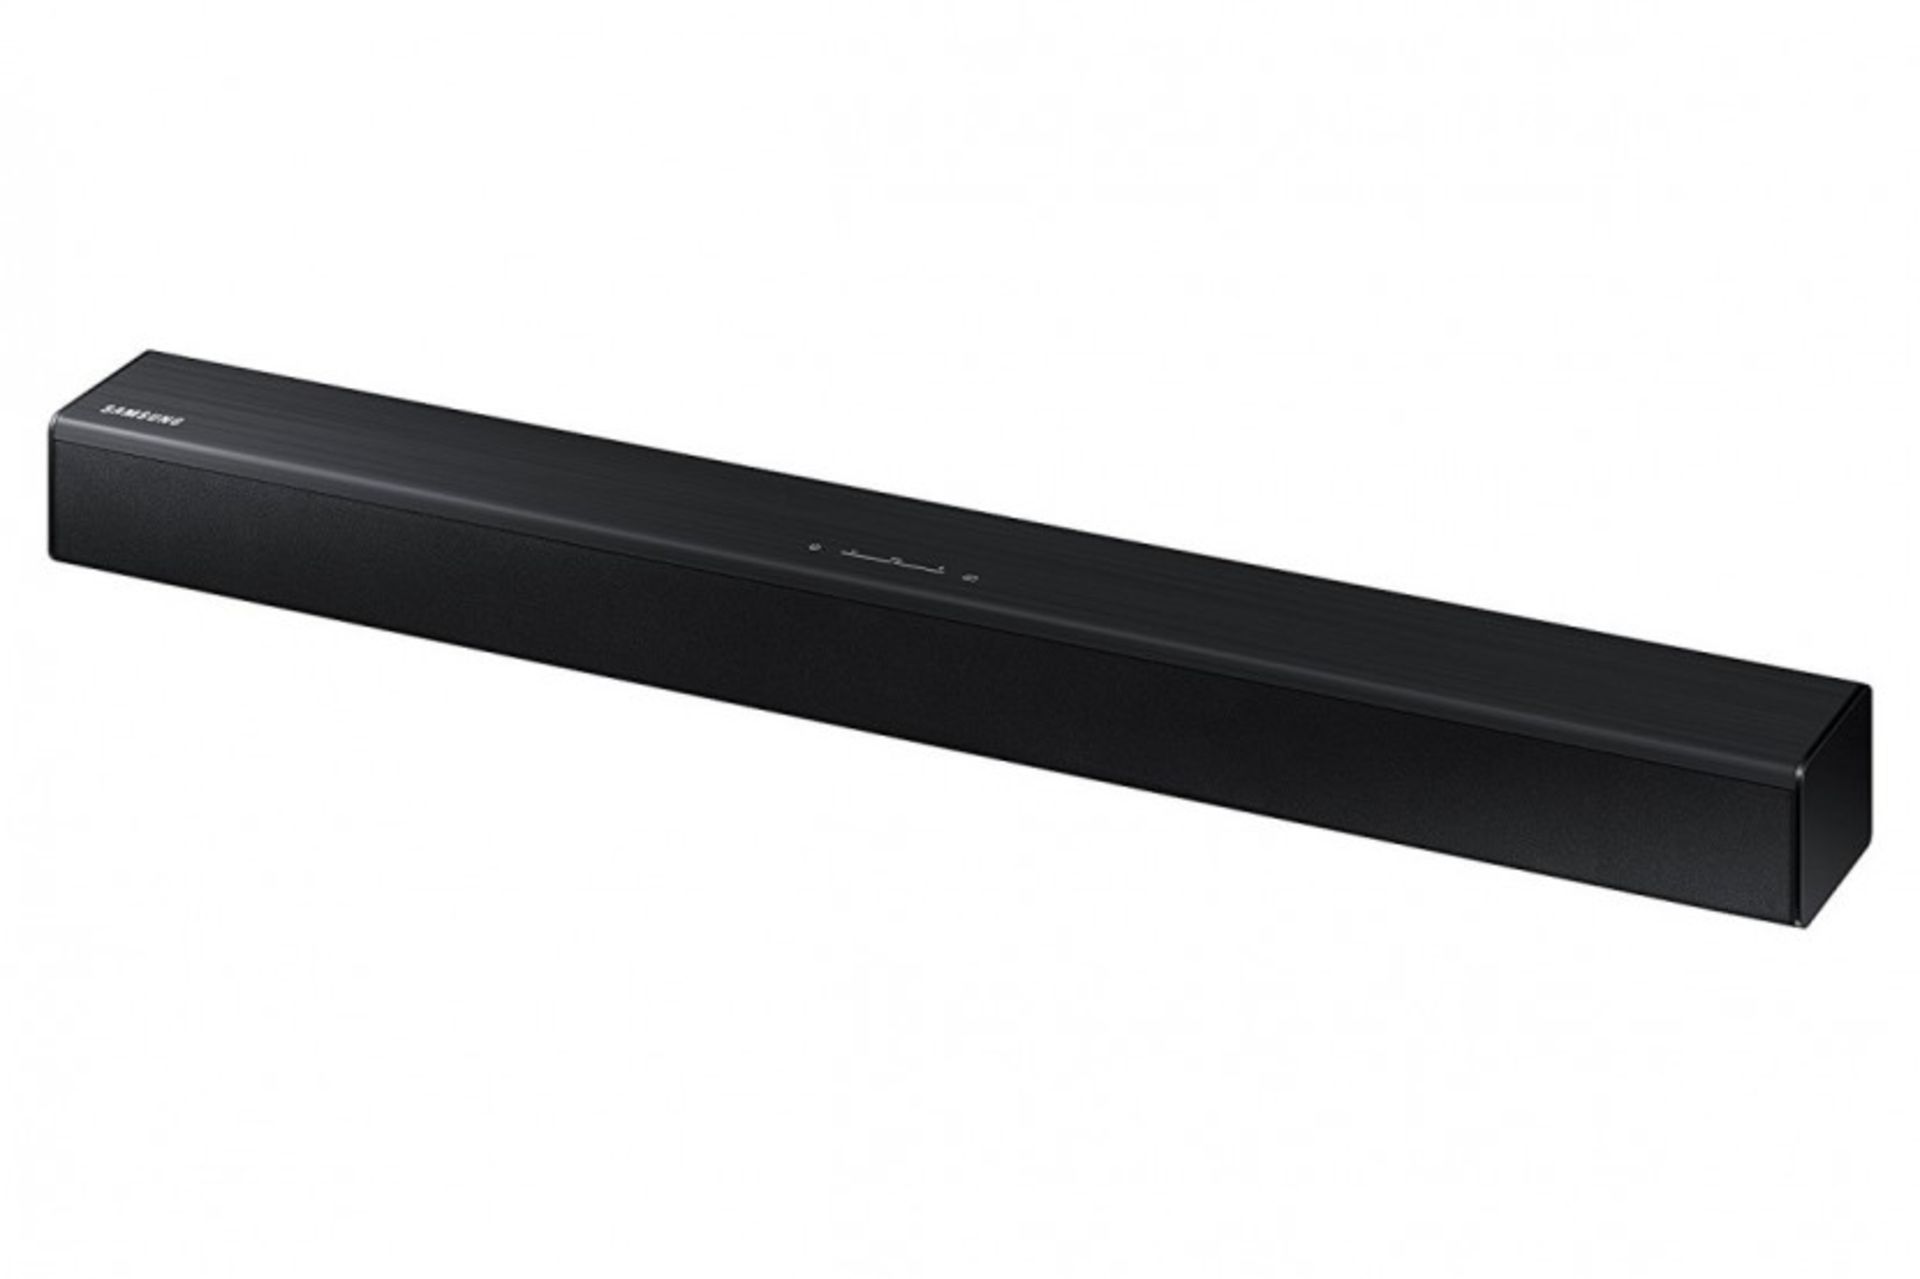 (18) 1 x Grade B - Samsung HW-J250 80 W 2.2 Channel Soundbar with Bluetooth and Built-In Subwoo... - Image 4 of 4